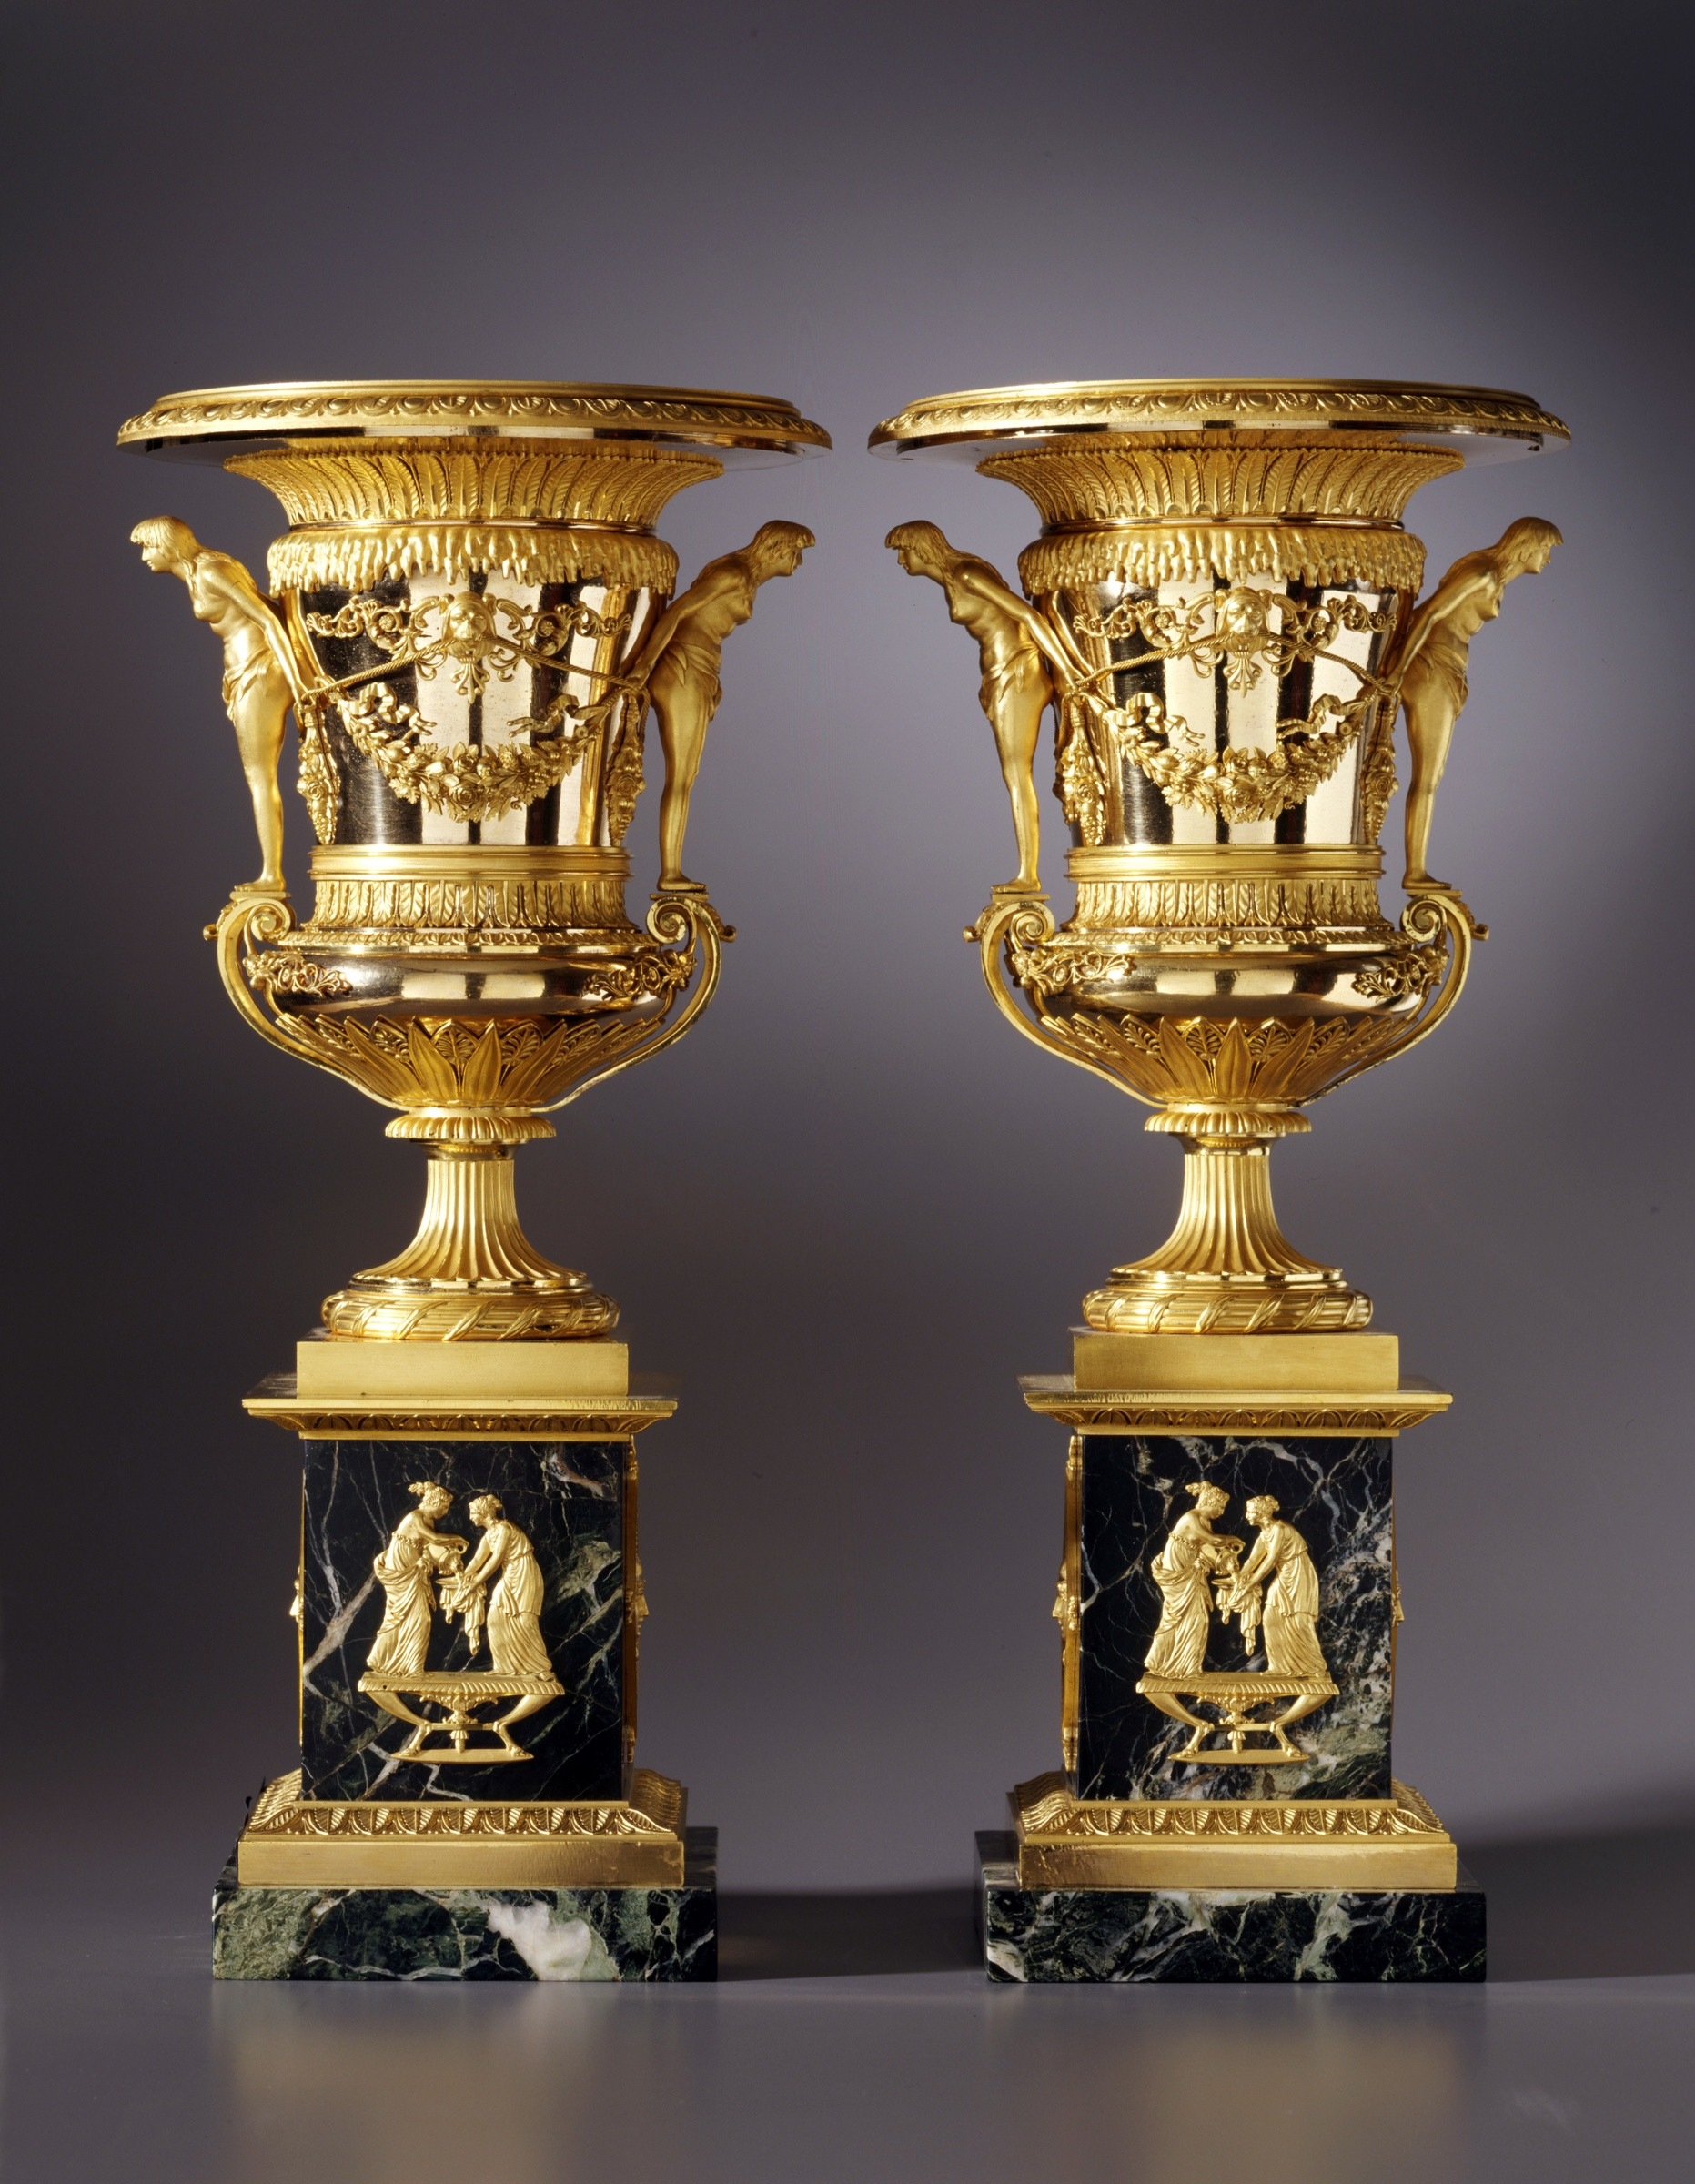 14 attractive Gold and Glass Vase 2024 free download gold and glass vase of friedrich bergenfeldt attributed to a pair of large sized st with regard to a pair of large sized st petersburg empire vases attributed to friedrich bergenfeldt